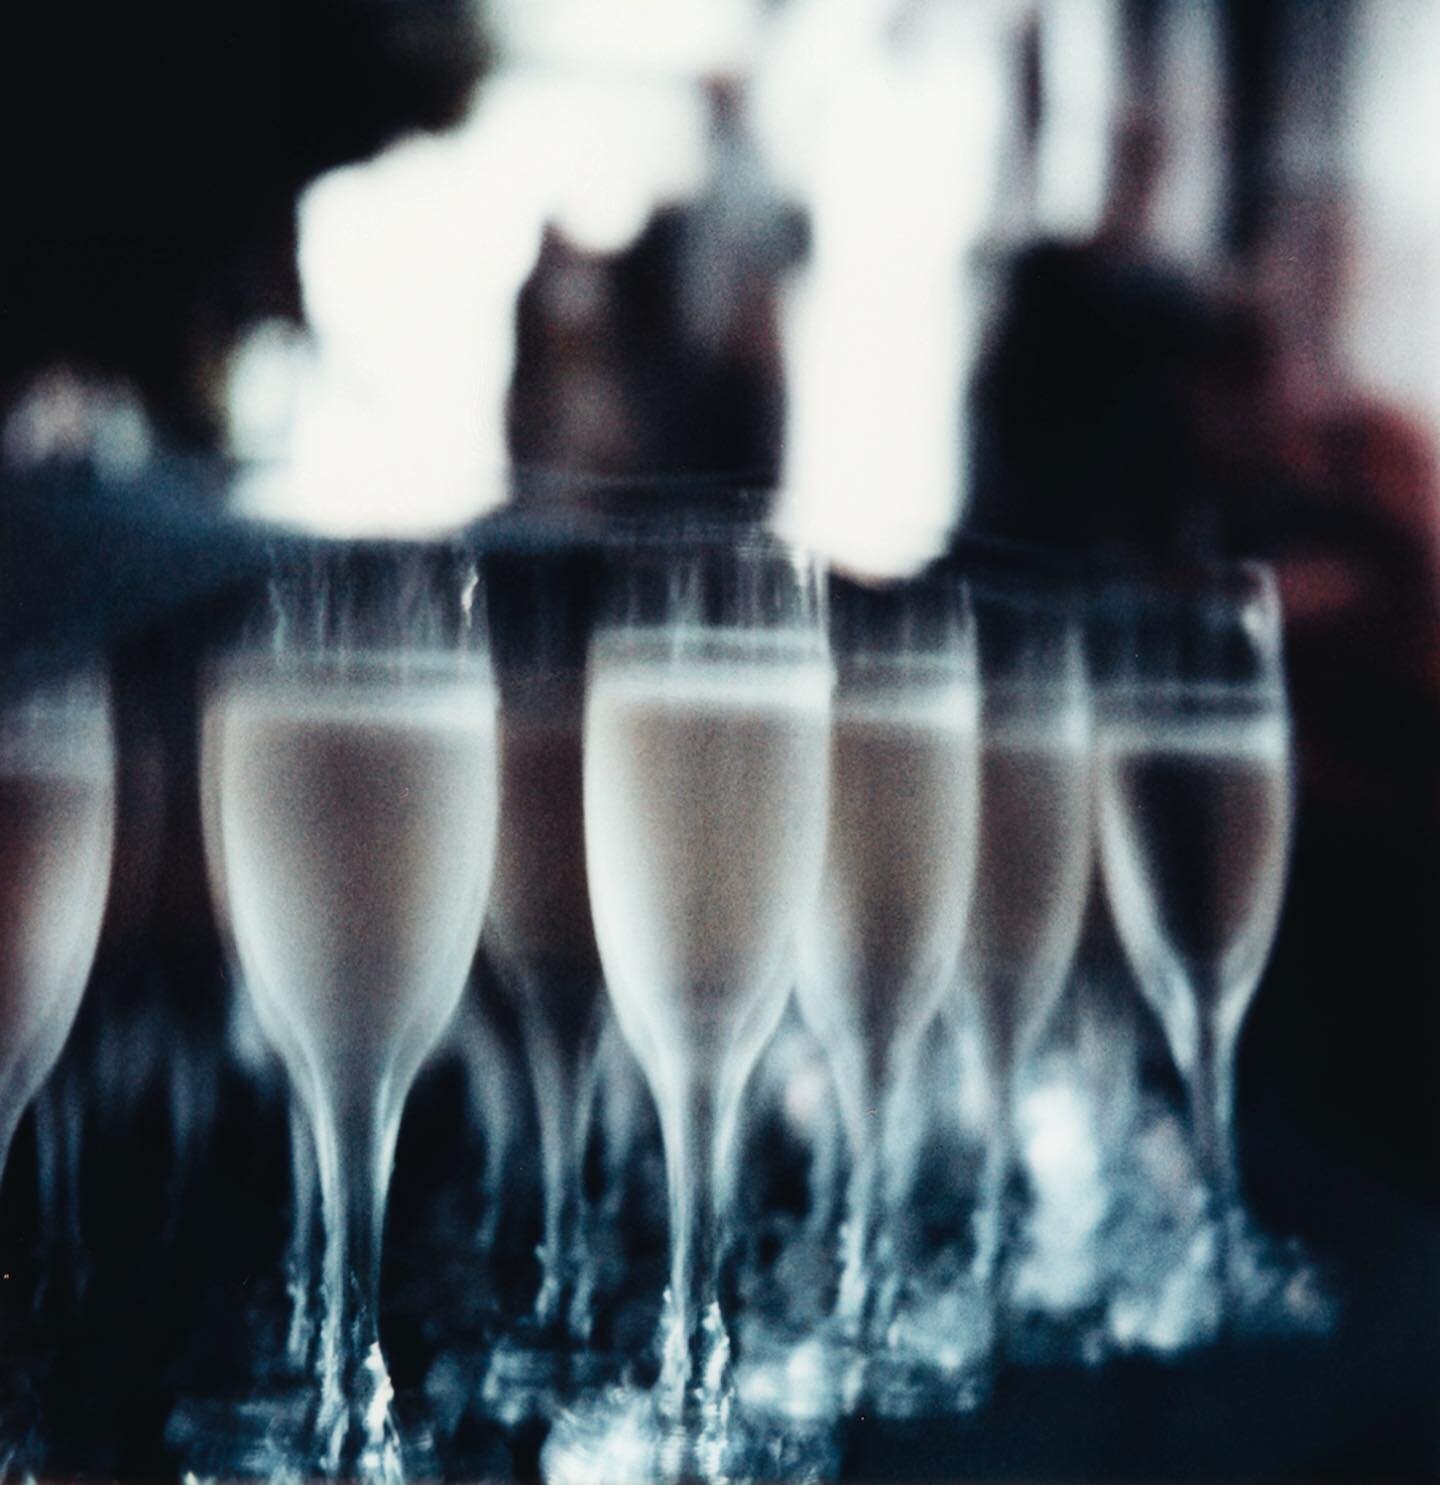 It&rsquo;s all in the details. #polaroidsx70 #weddingdetails #nycwedding #cheers